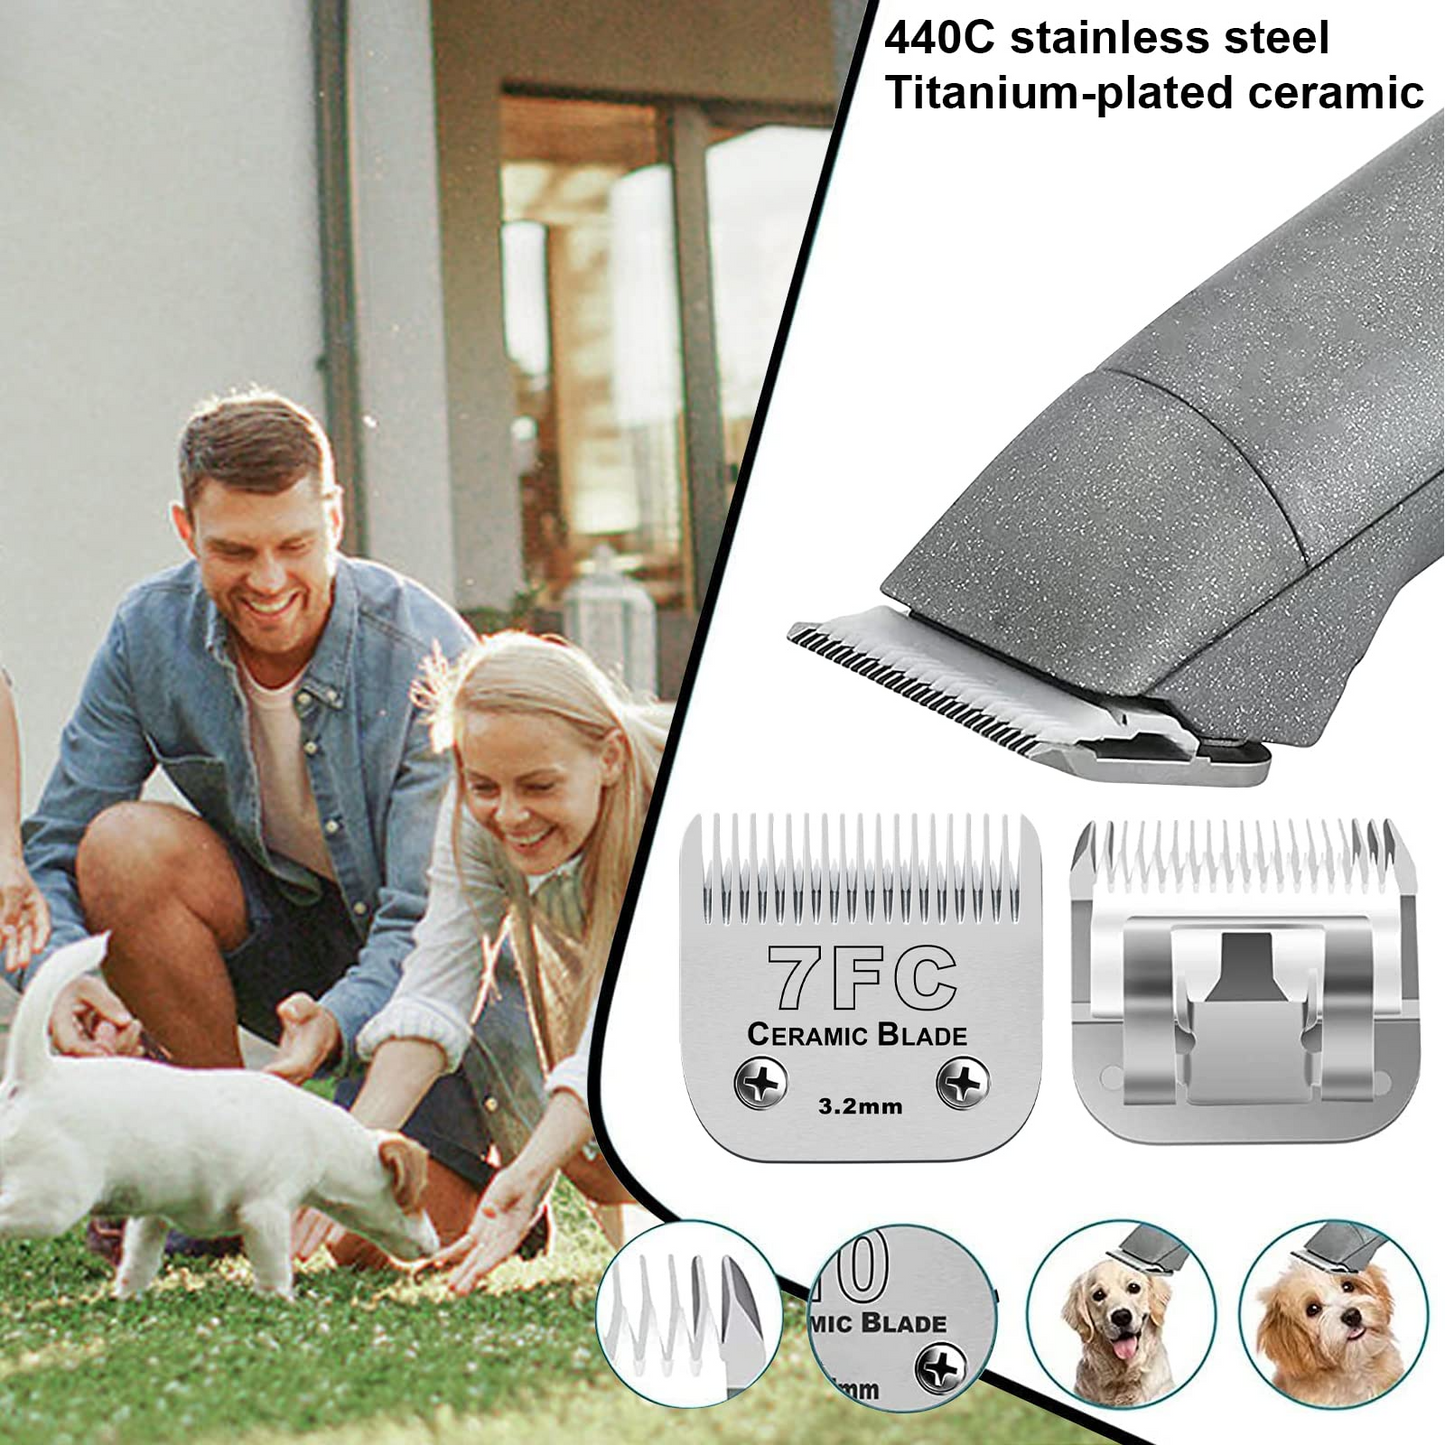 Dog Grooming Clipper Replacement Blades Compatible with Andis/Wahl / Oster Dog Clippers,Detachable Ceramic Blade & Stainless Steel Blades(4FC+3FC+5FC+7FC+10)